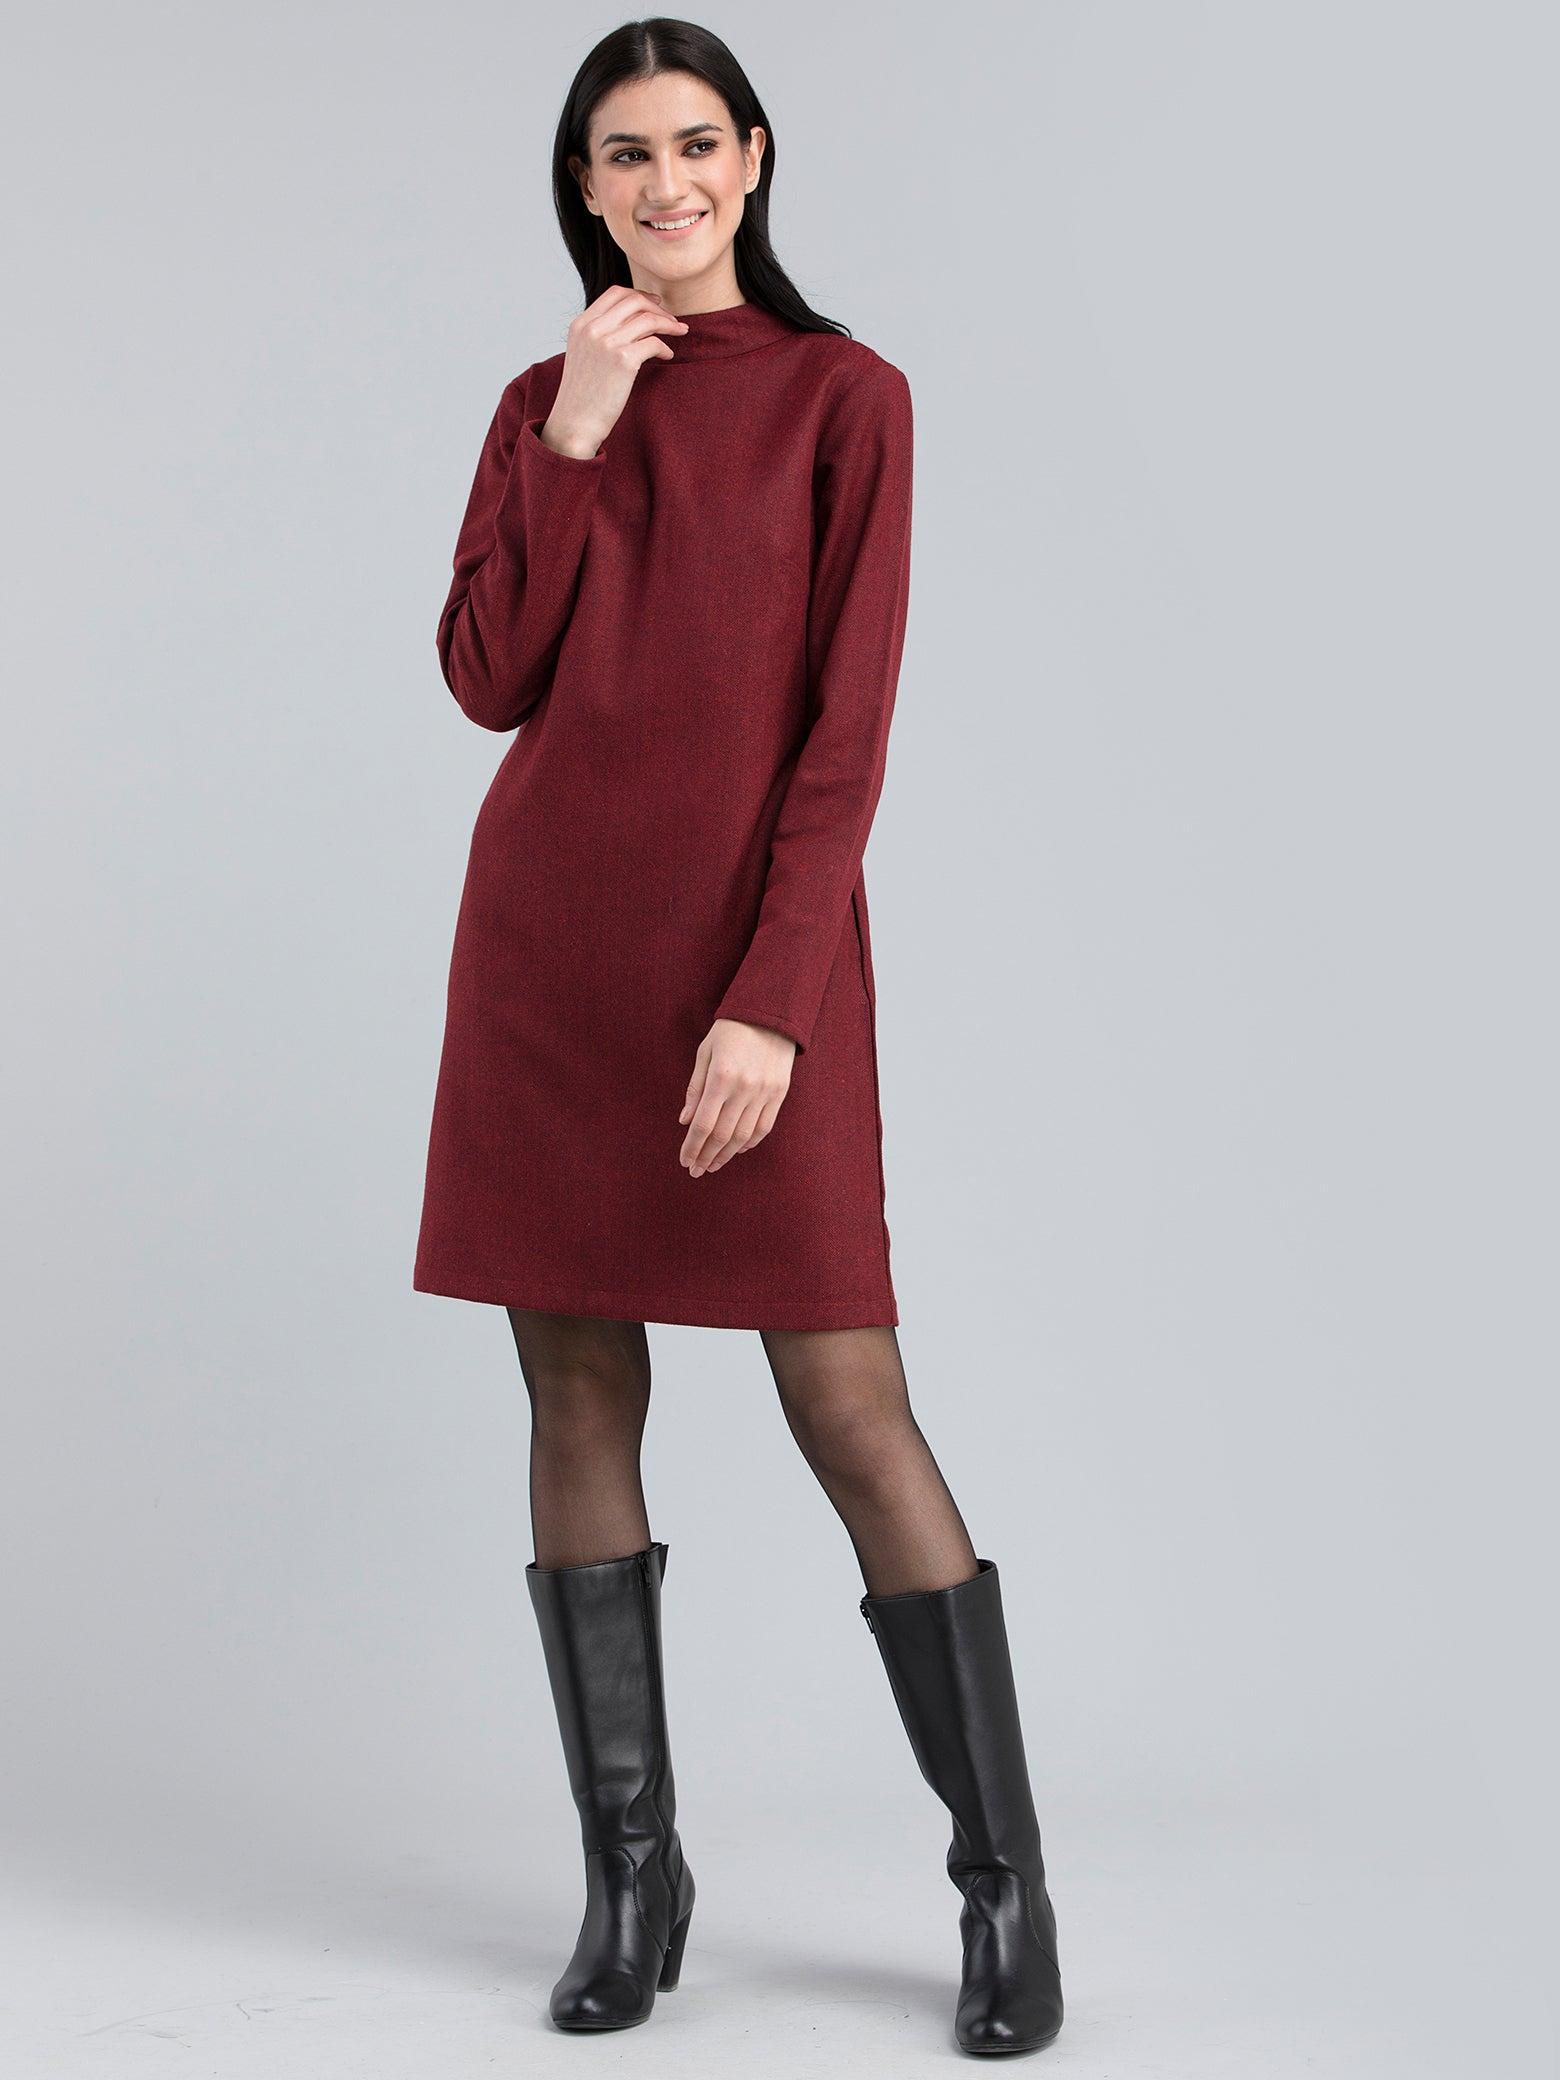 Tweed Collared Shift Dress - Red| Formal Dresses